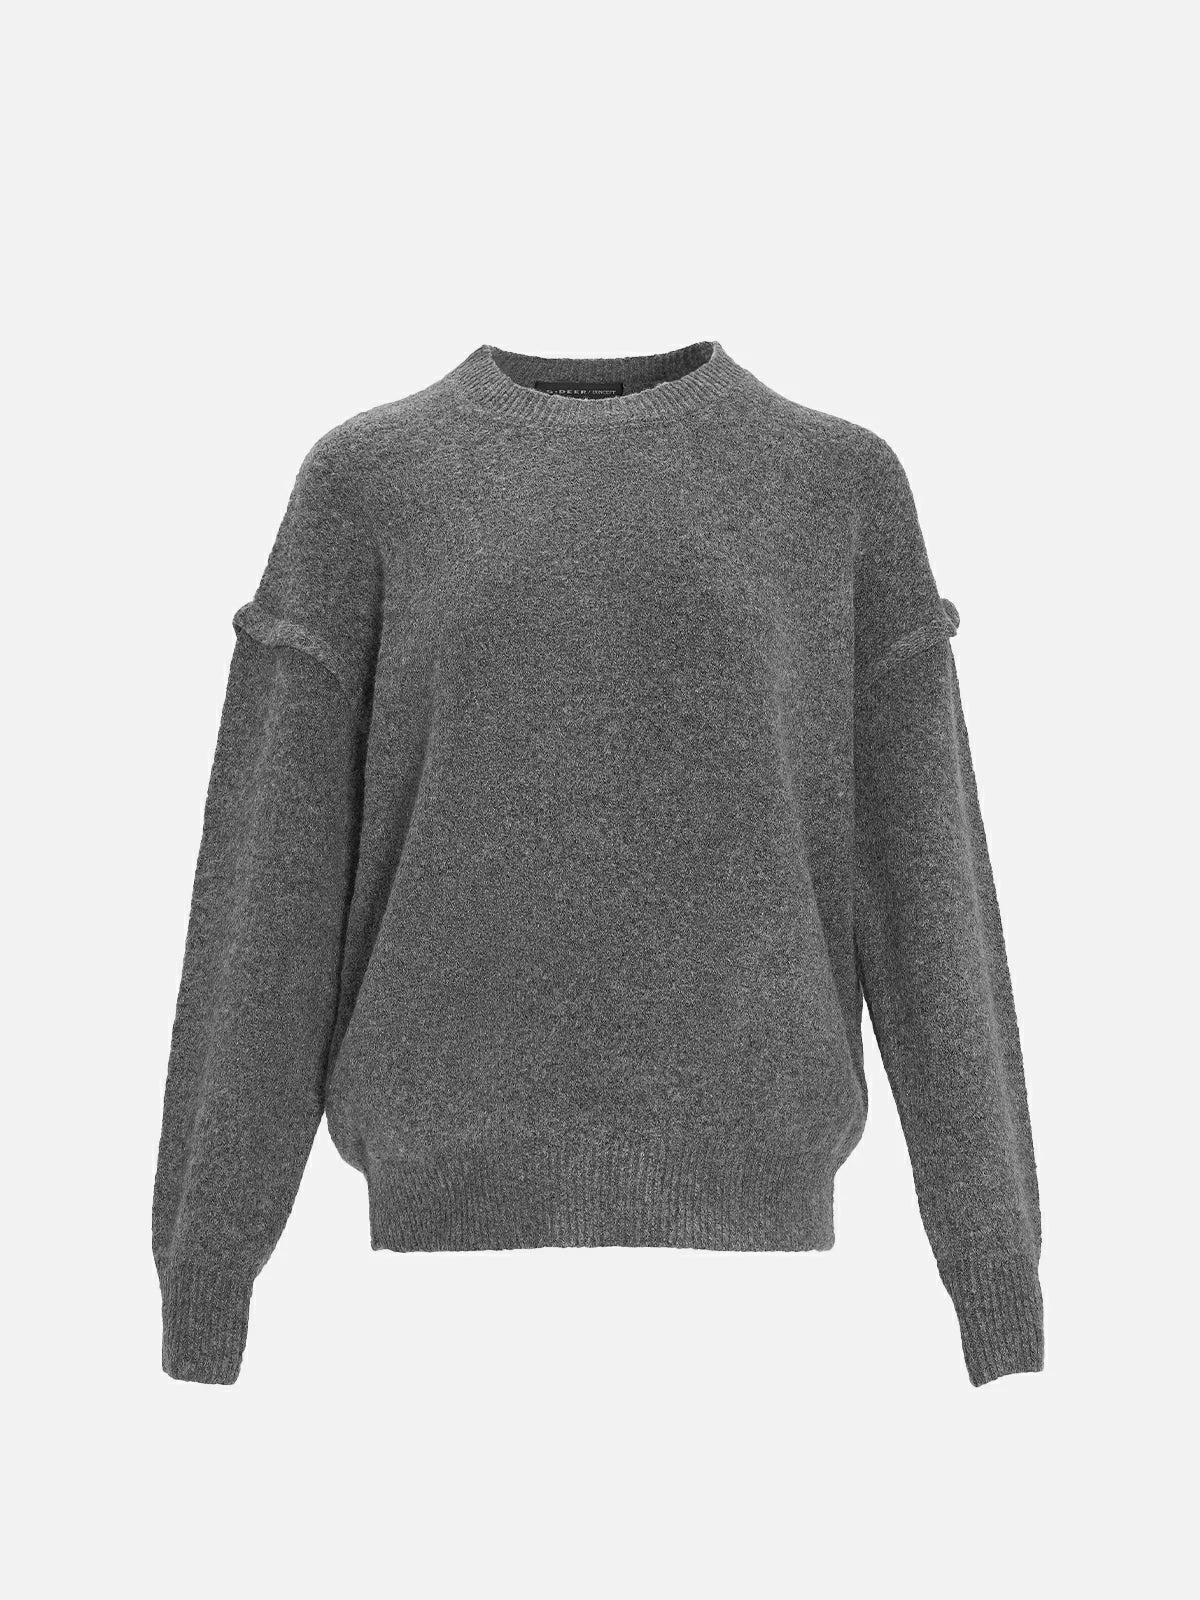 Elevate your wardrobe essentials with this gray sweater, featuring a round-neck design and a slim silhouette.